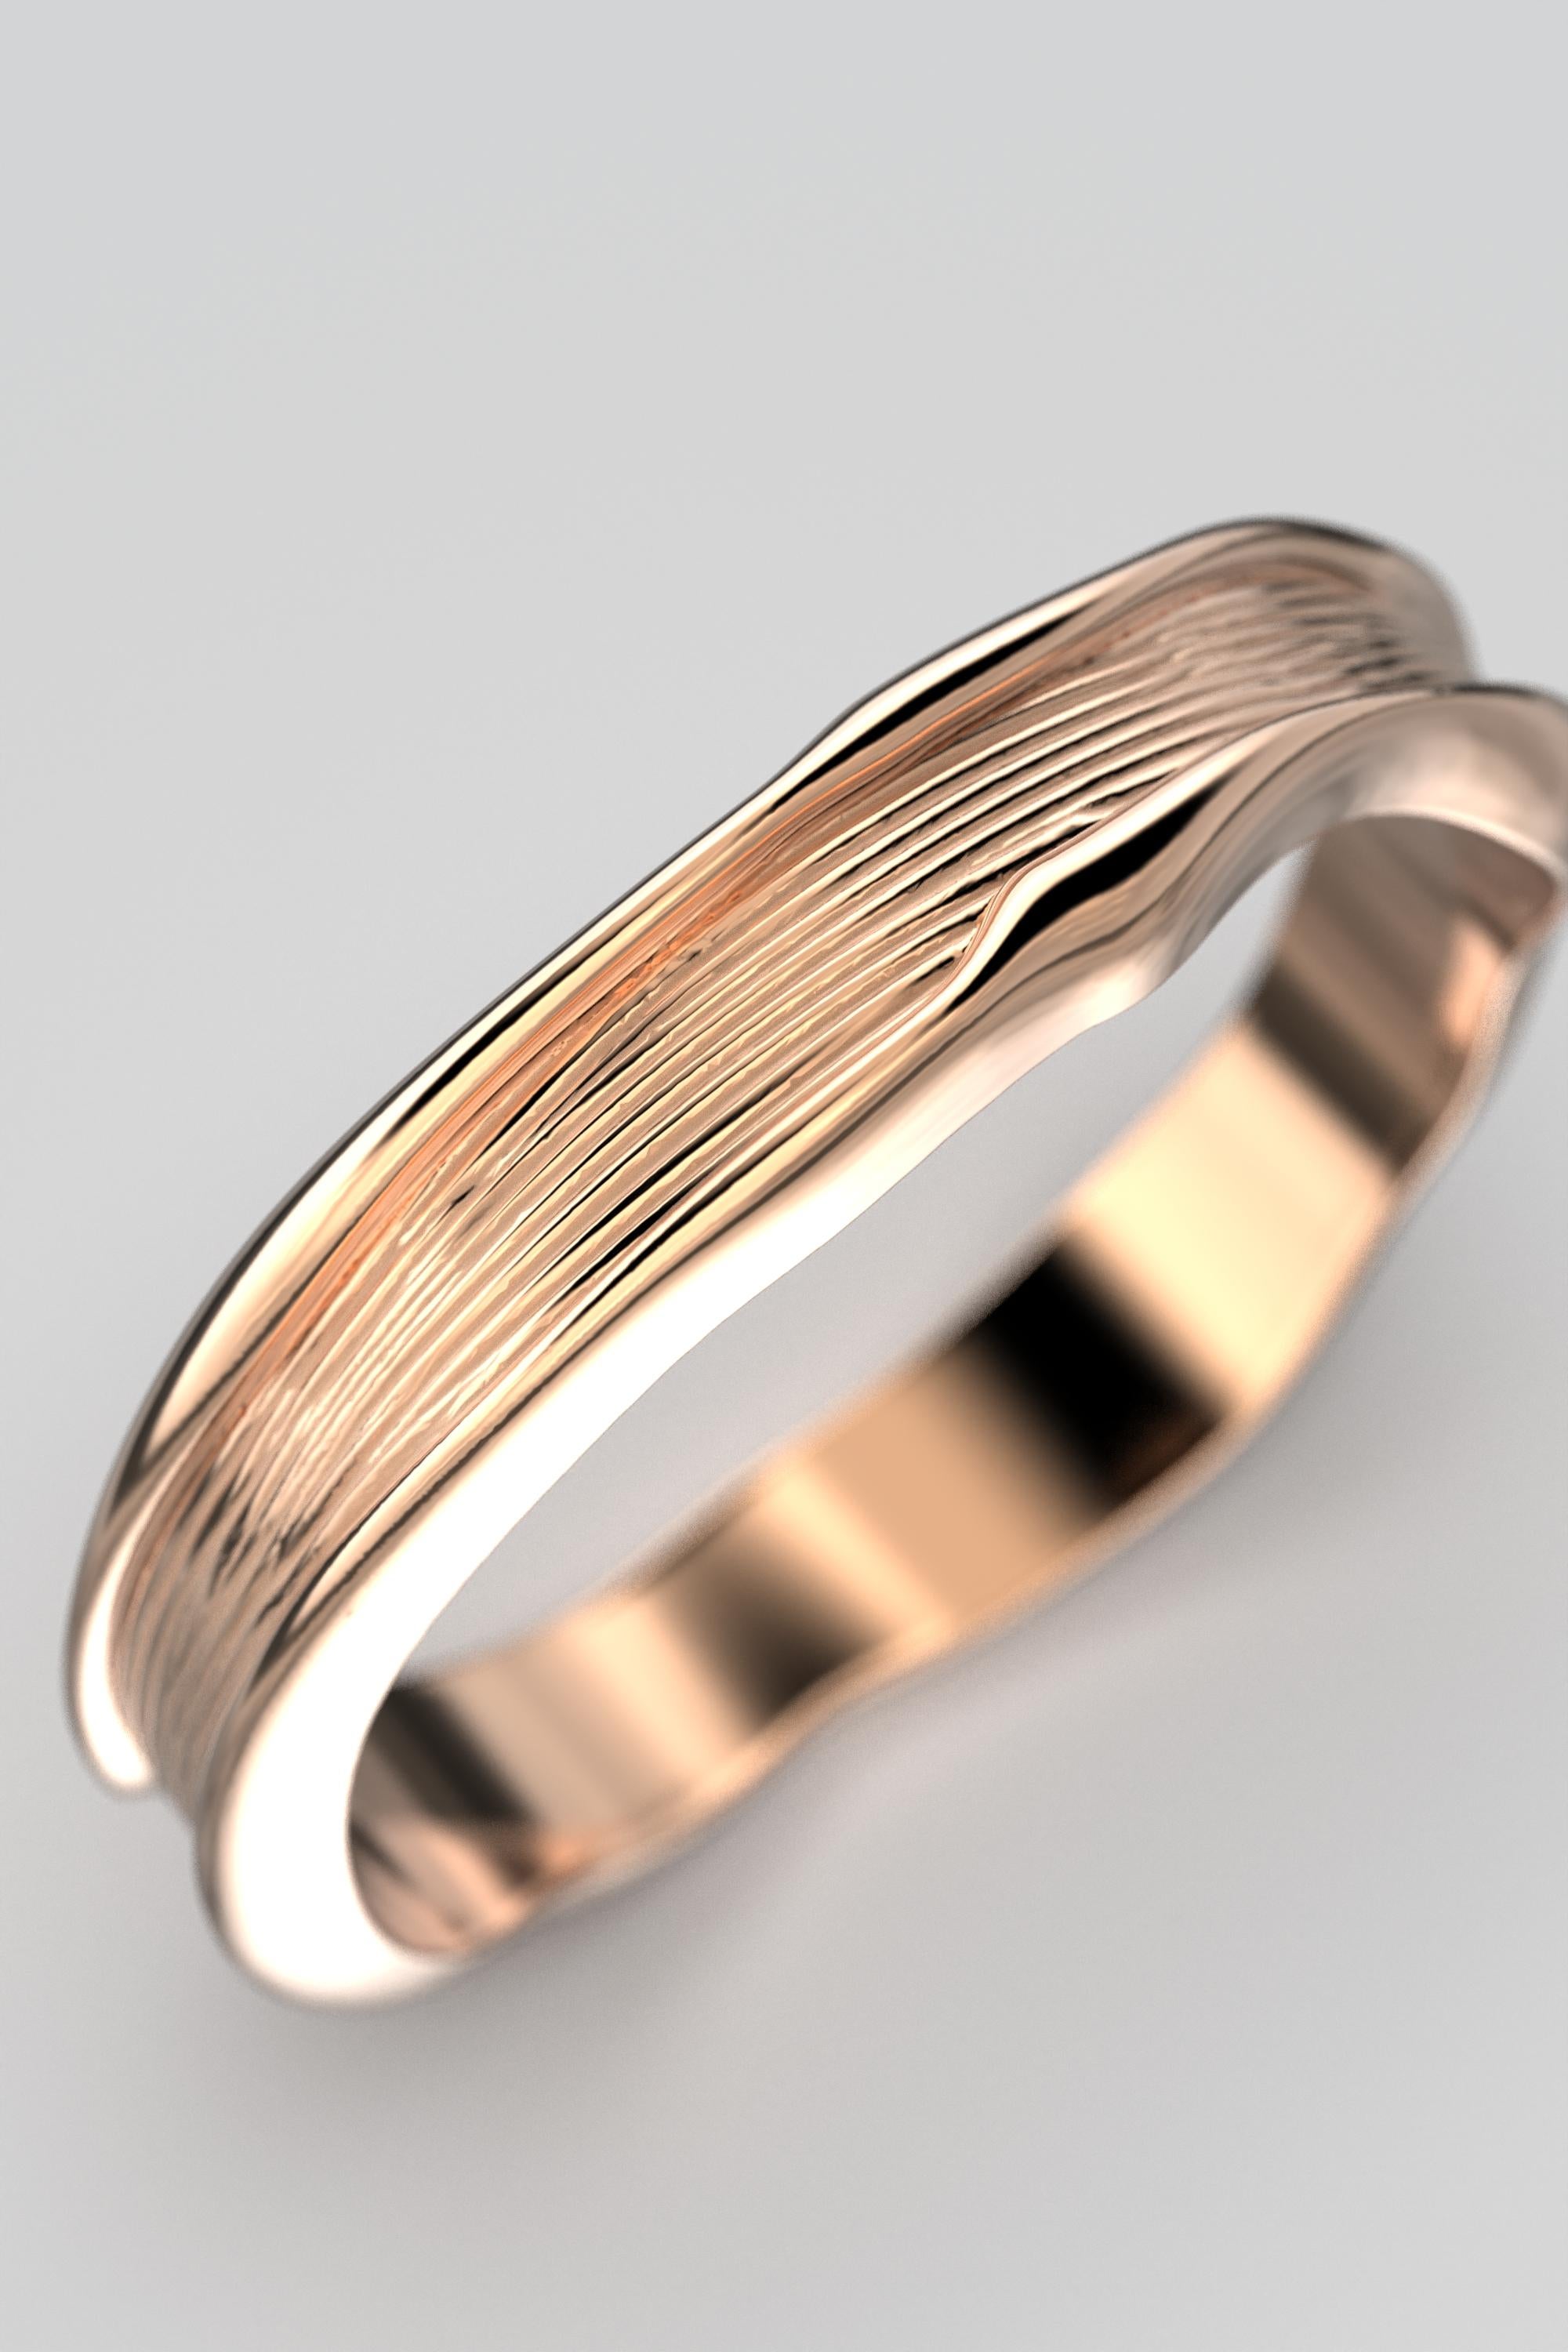 For Sale:  Florentine Finish Sophisticated Gold Wedding Band in 18k Made in Italy 8